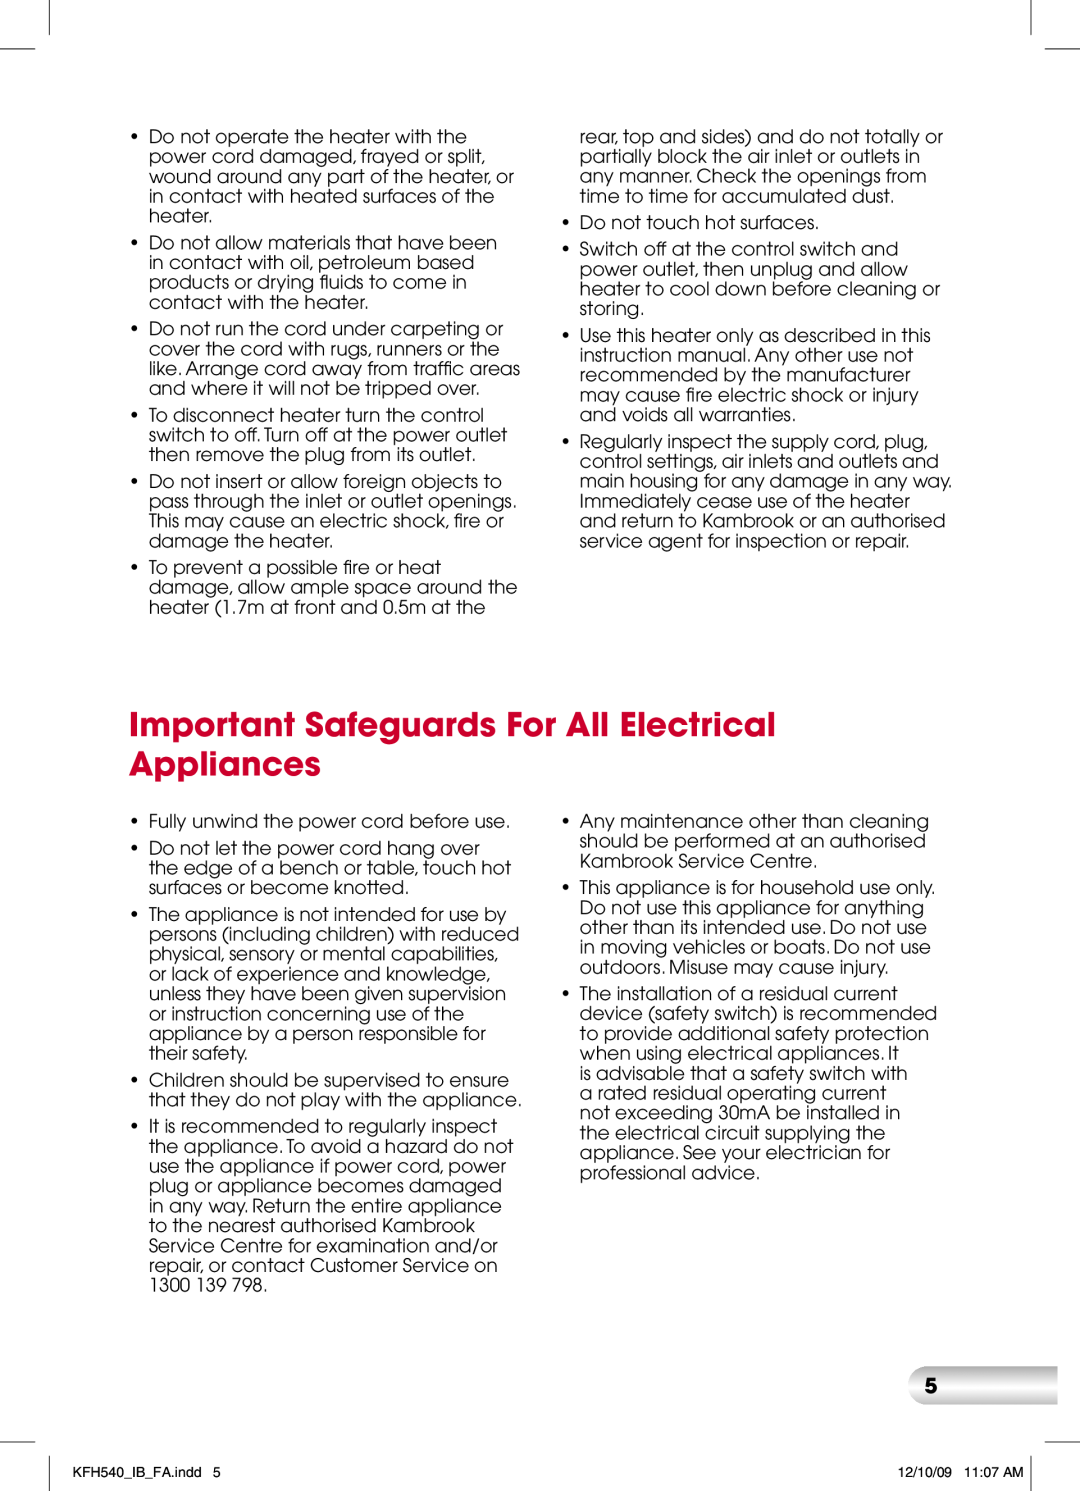 Kambrook KFH540 manual Important Safeguards For All Electrical Appliances 